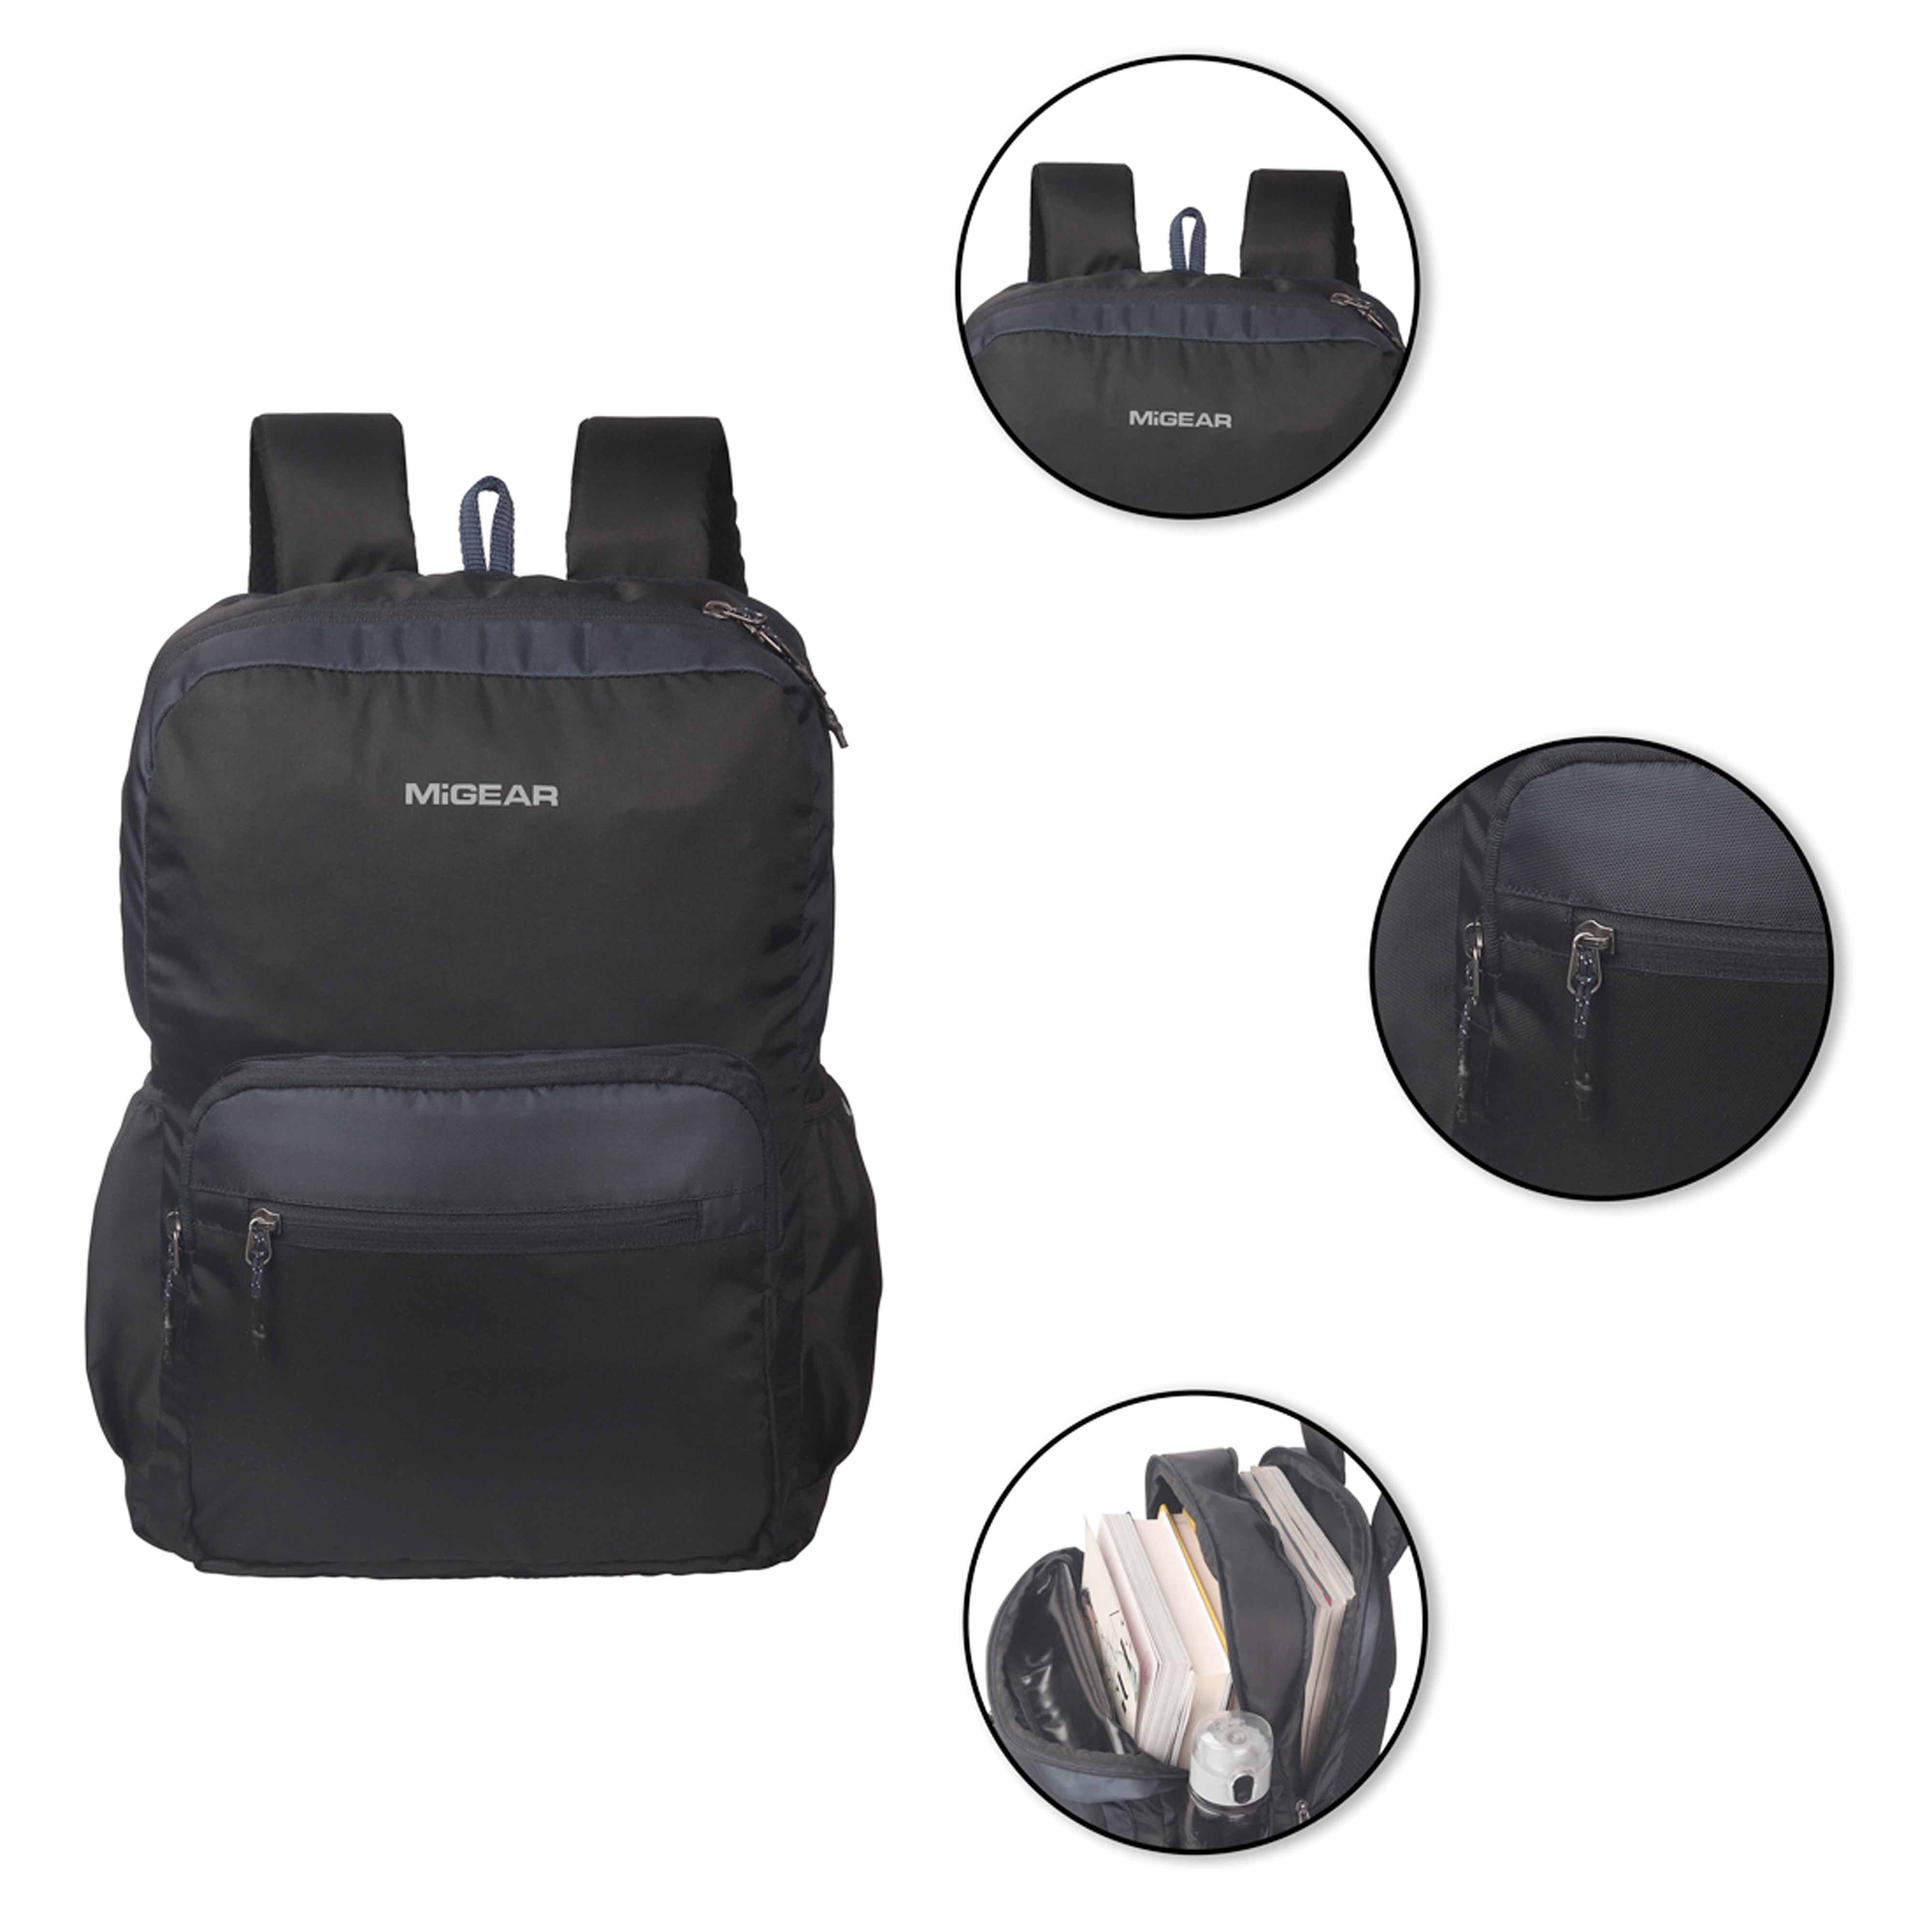 The Insignia Backpack